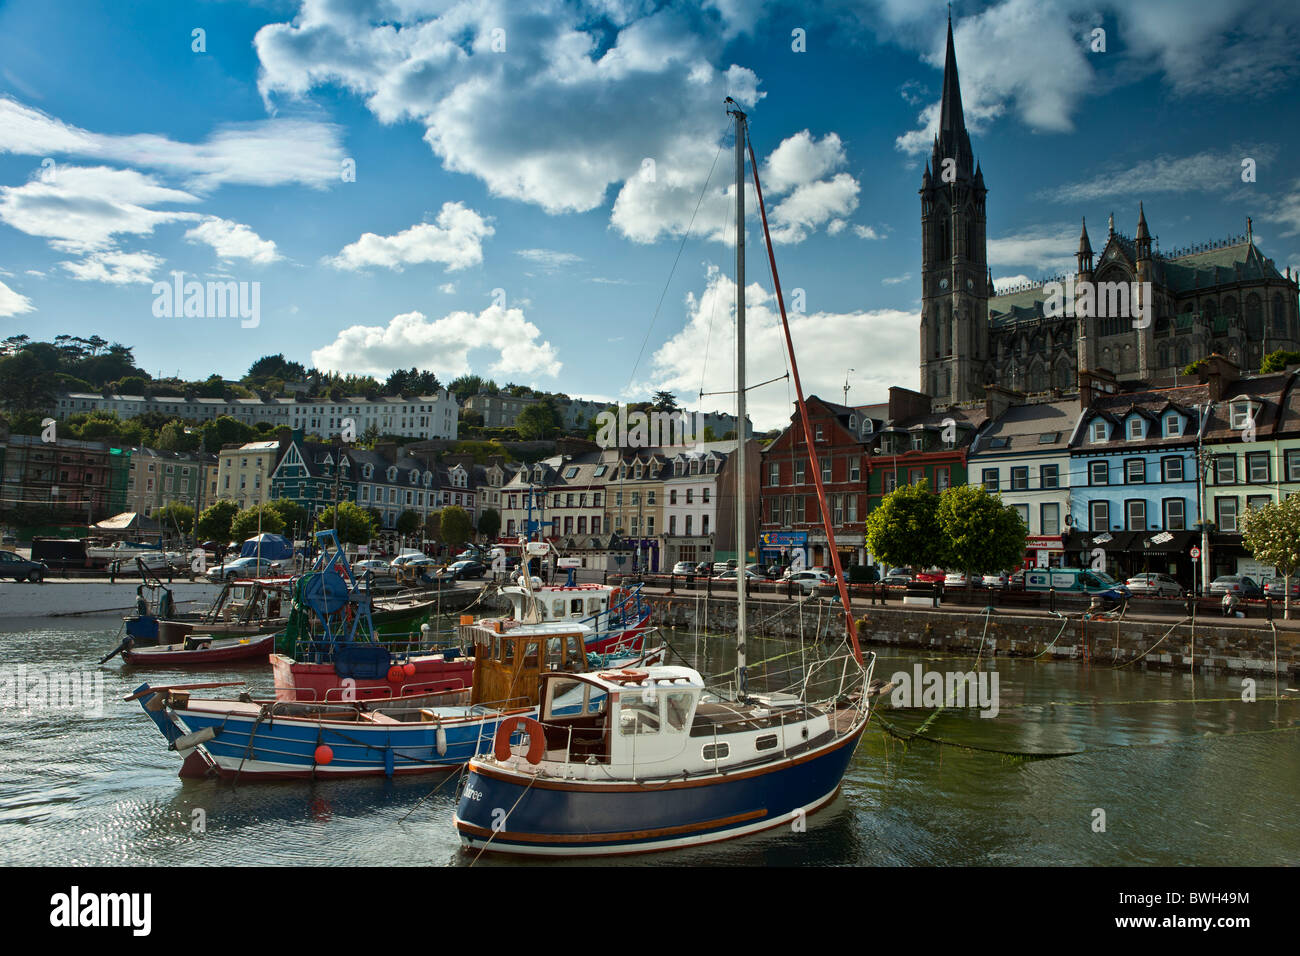 Popular as a tourist destination Cobh harbour with brightly coloured fishing boats in County Cork, Ireland Stock Photo